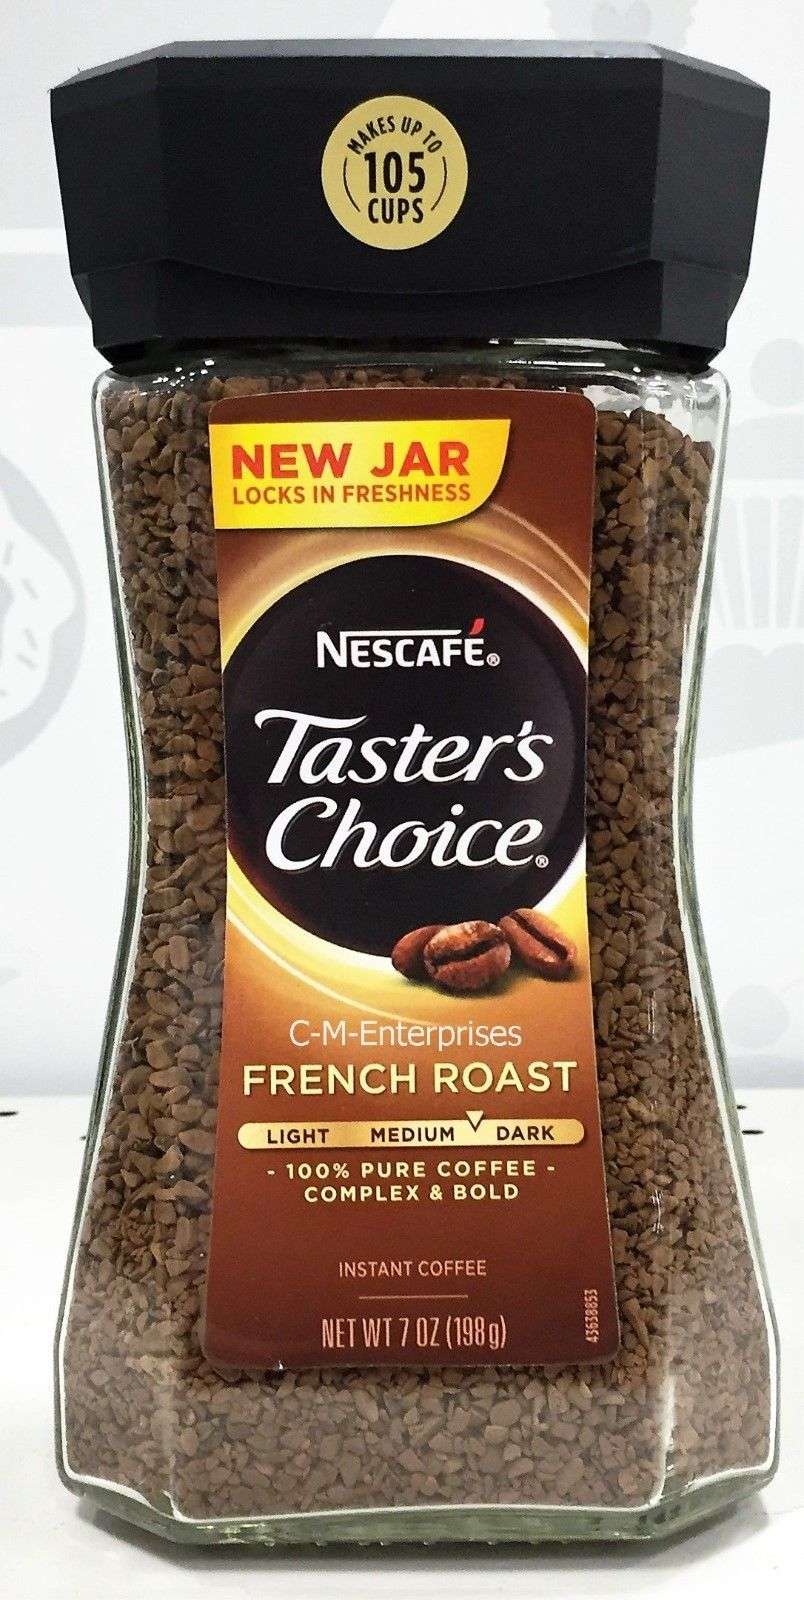 Tasters Choice Coffee Caffeine Content : Taster